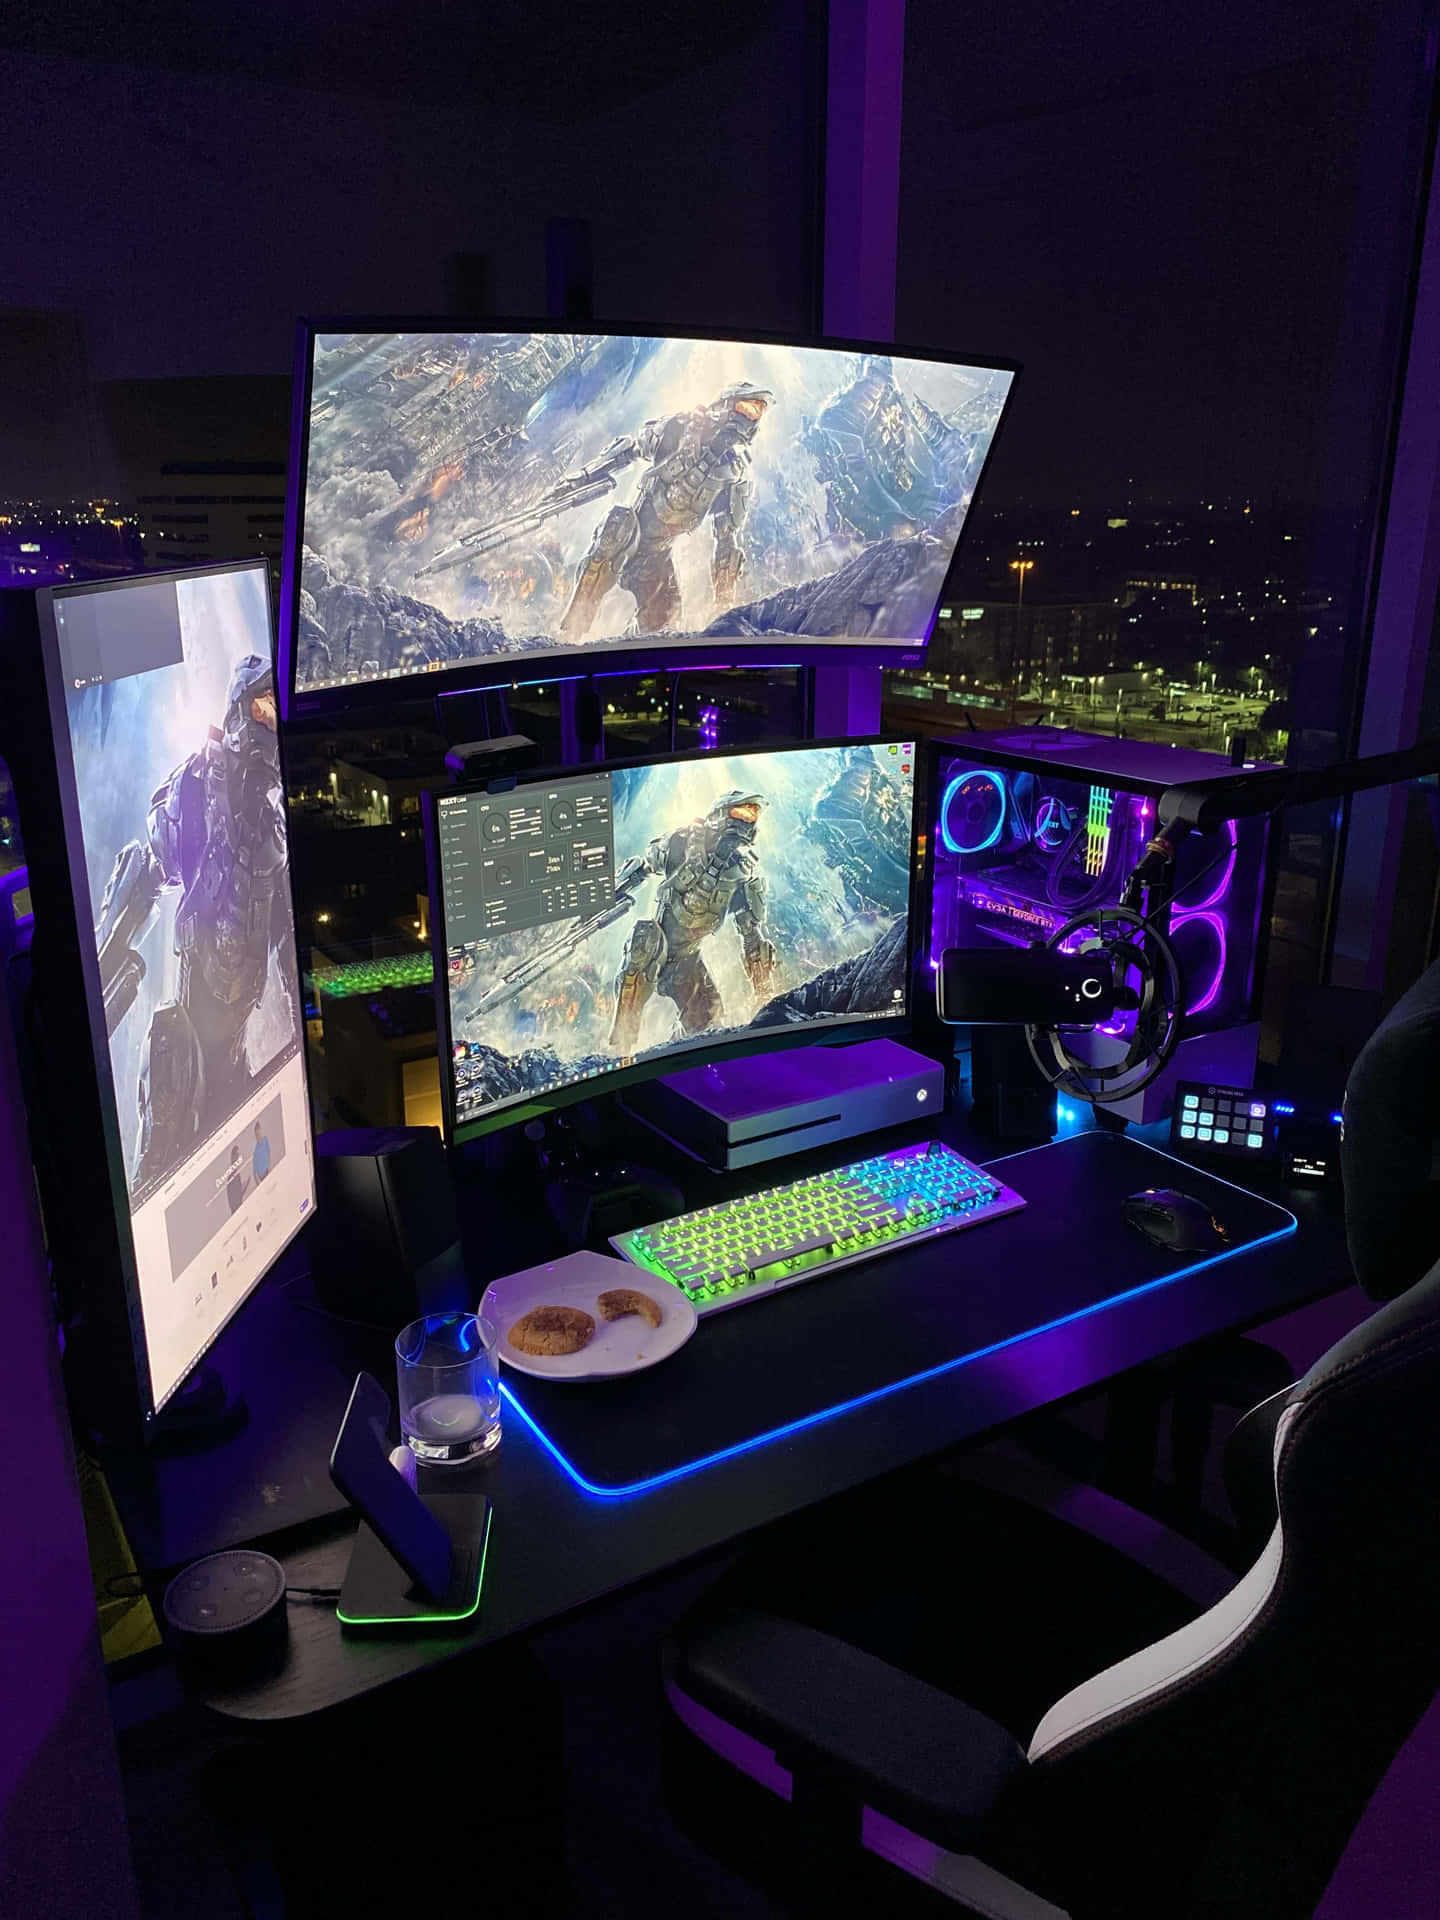 A powerful gaming PC setup with graphics card and triple monitors. Wallpaper